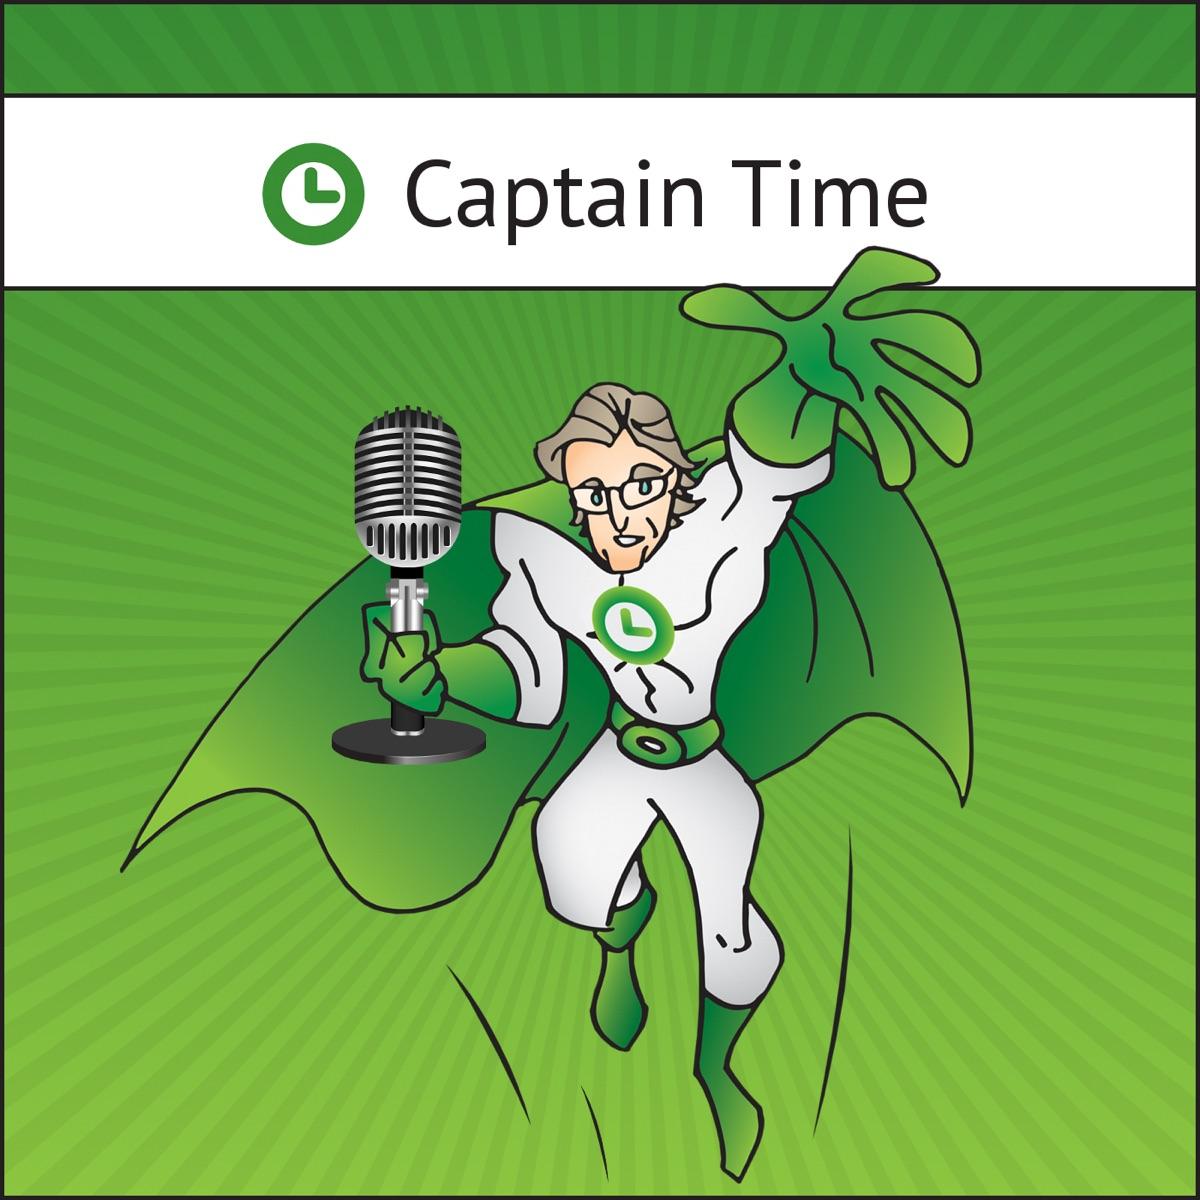 Time Management Tips from Captain Time